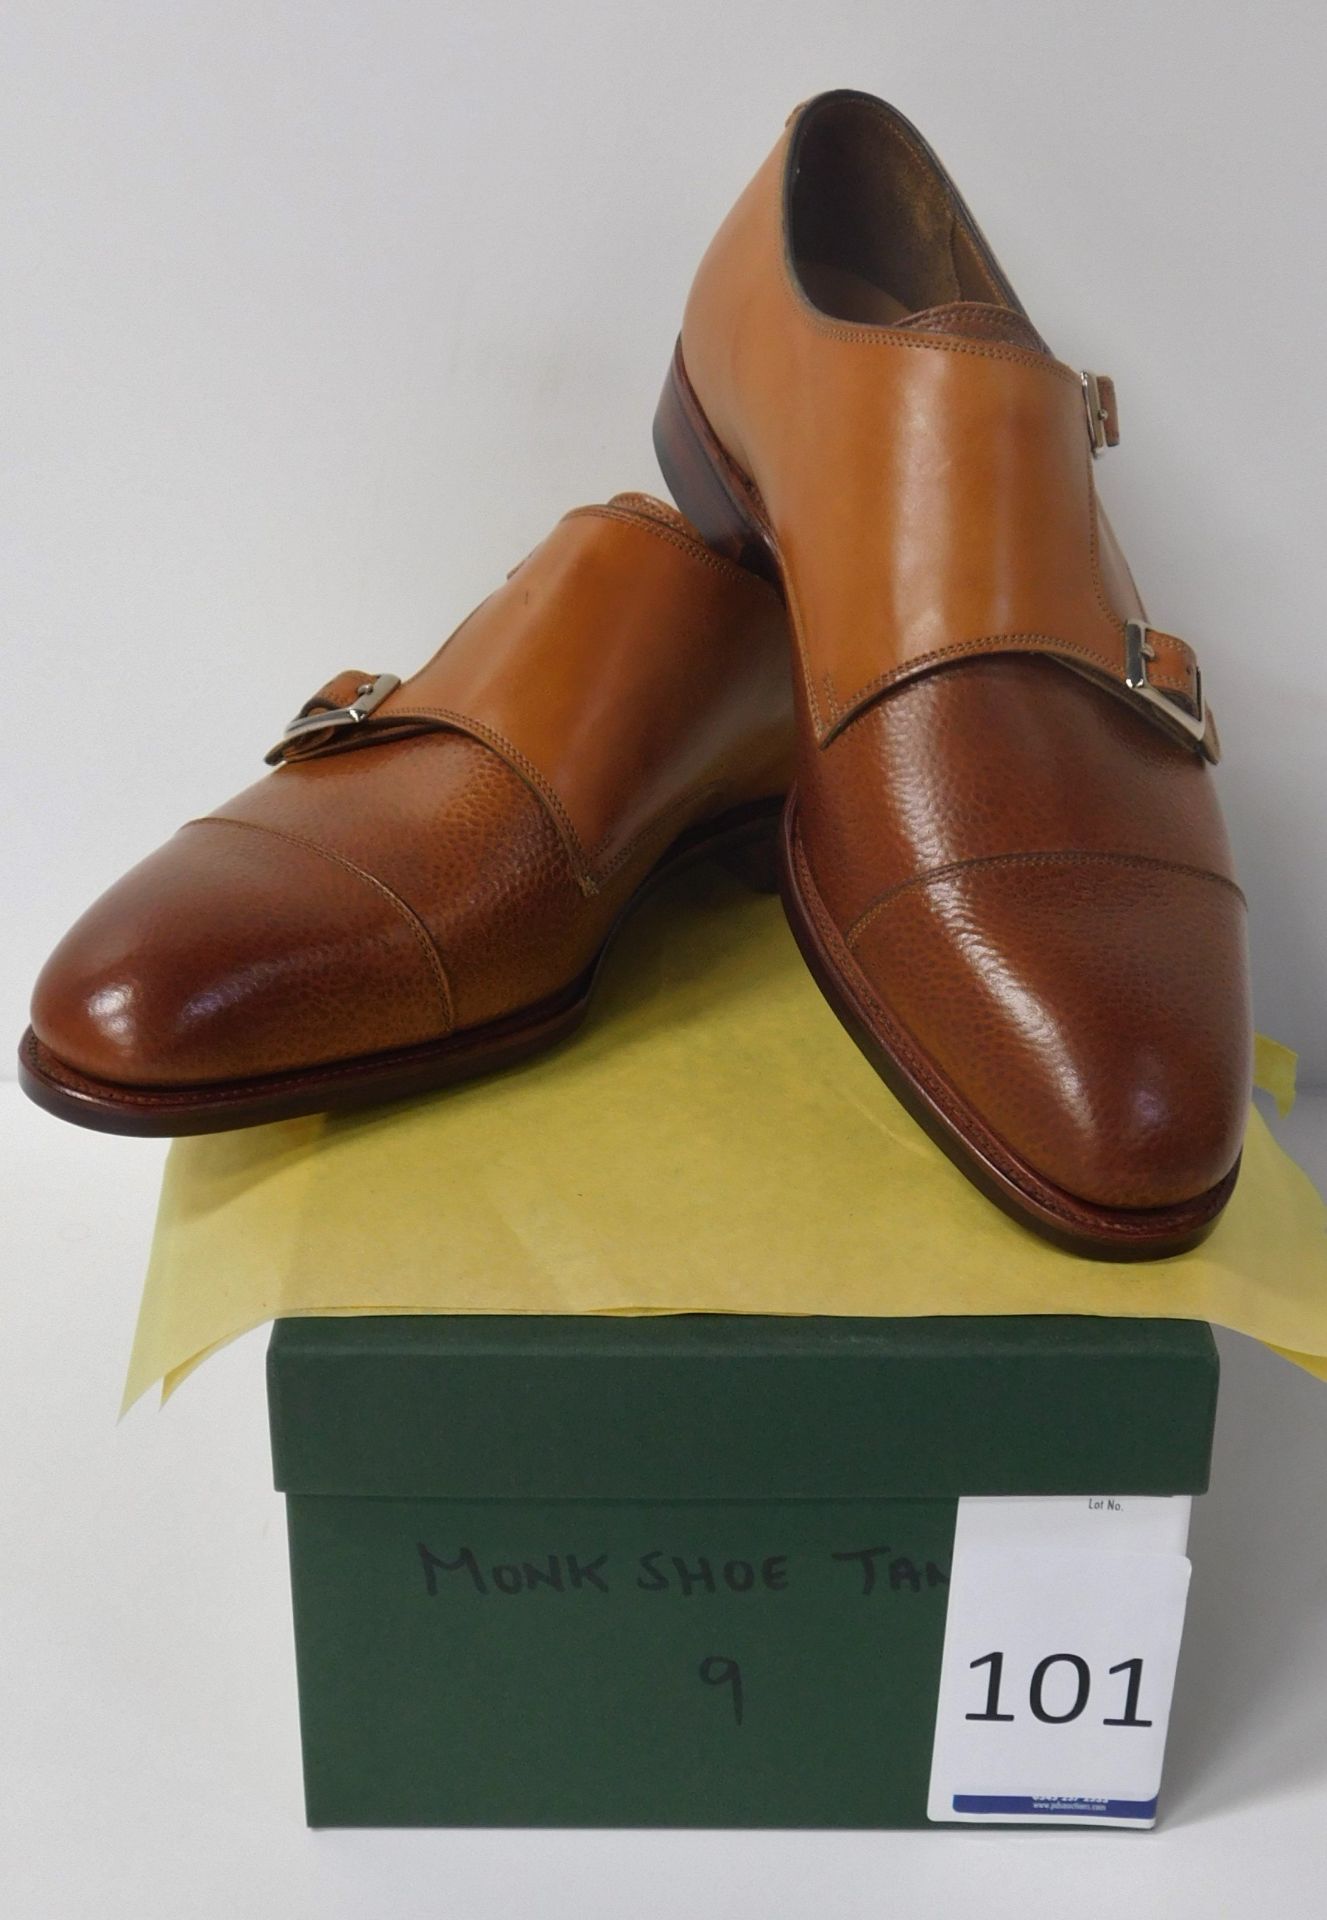 Pair of Alfred Sargent Monk Tan Twin Buckle, Size 9 (Slight Seconds) (Location: Brentwood - See